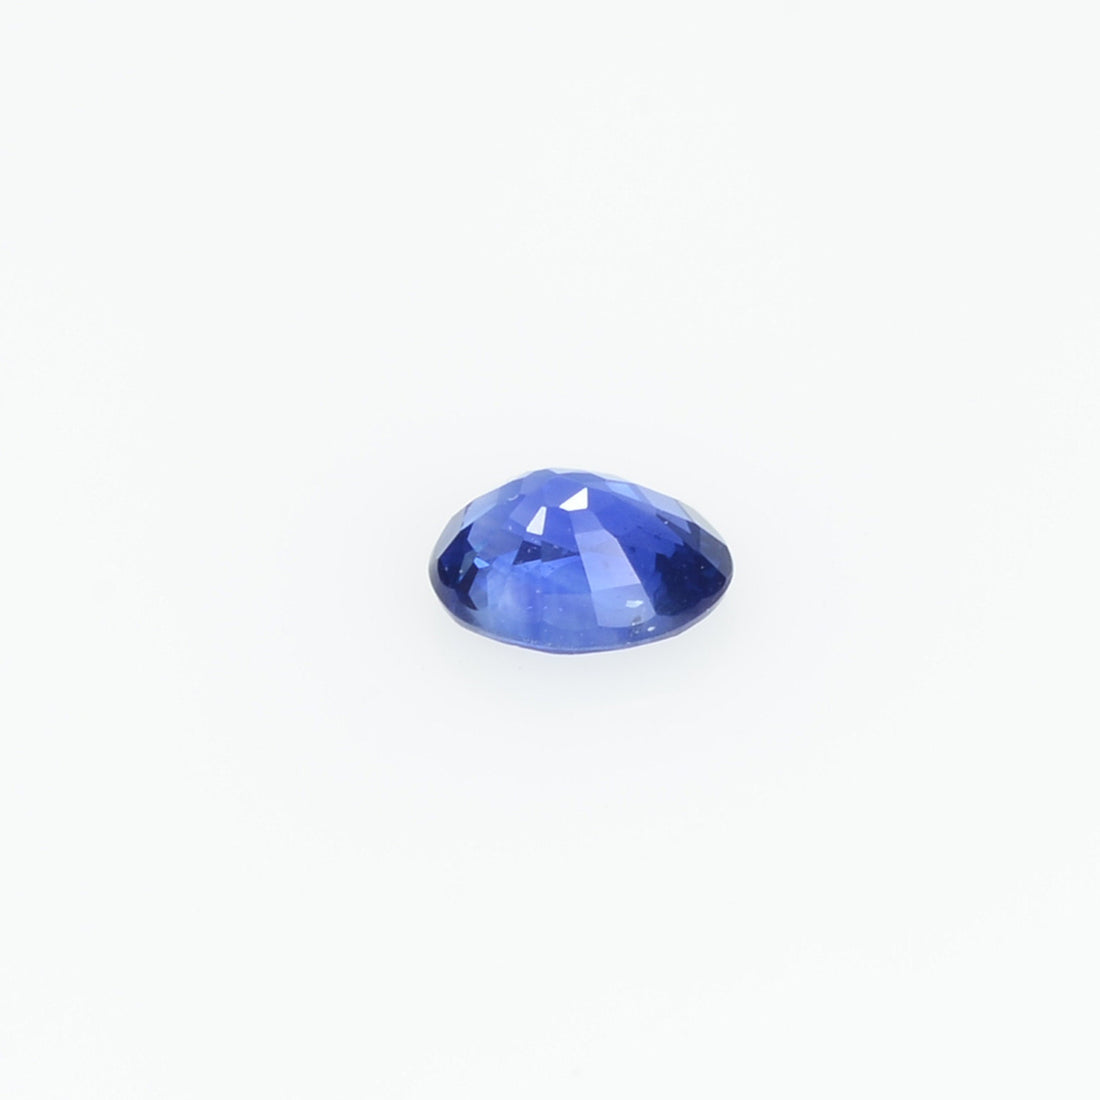 0.26 Cts Natural Blue sapphire loose gemstone oval cut